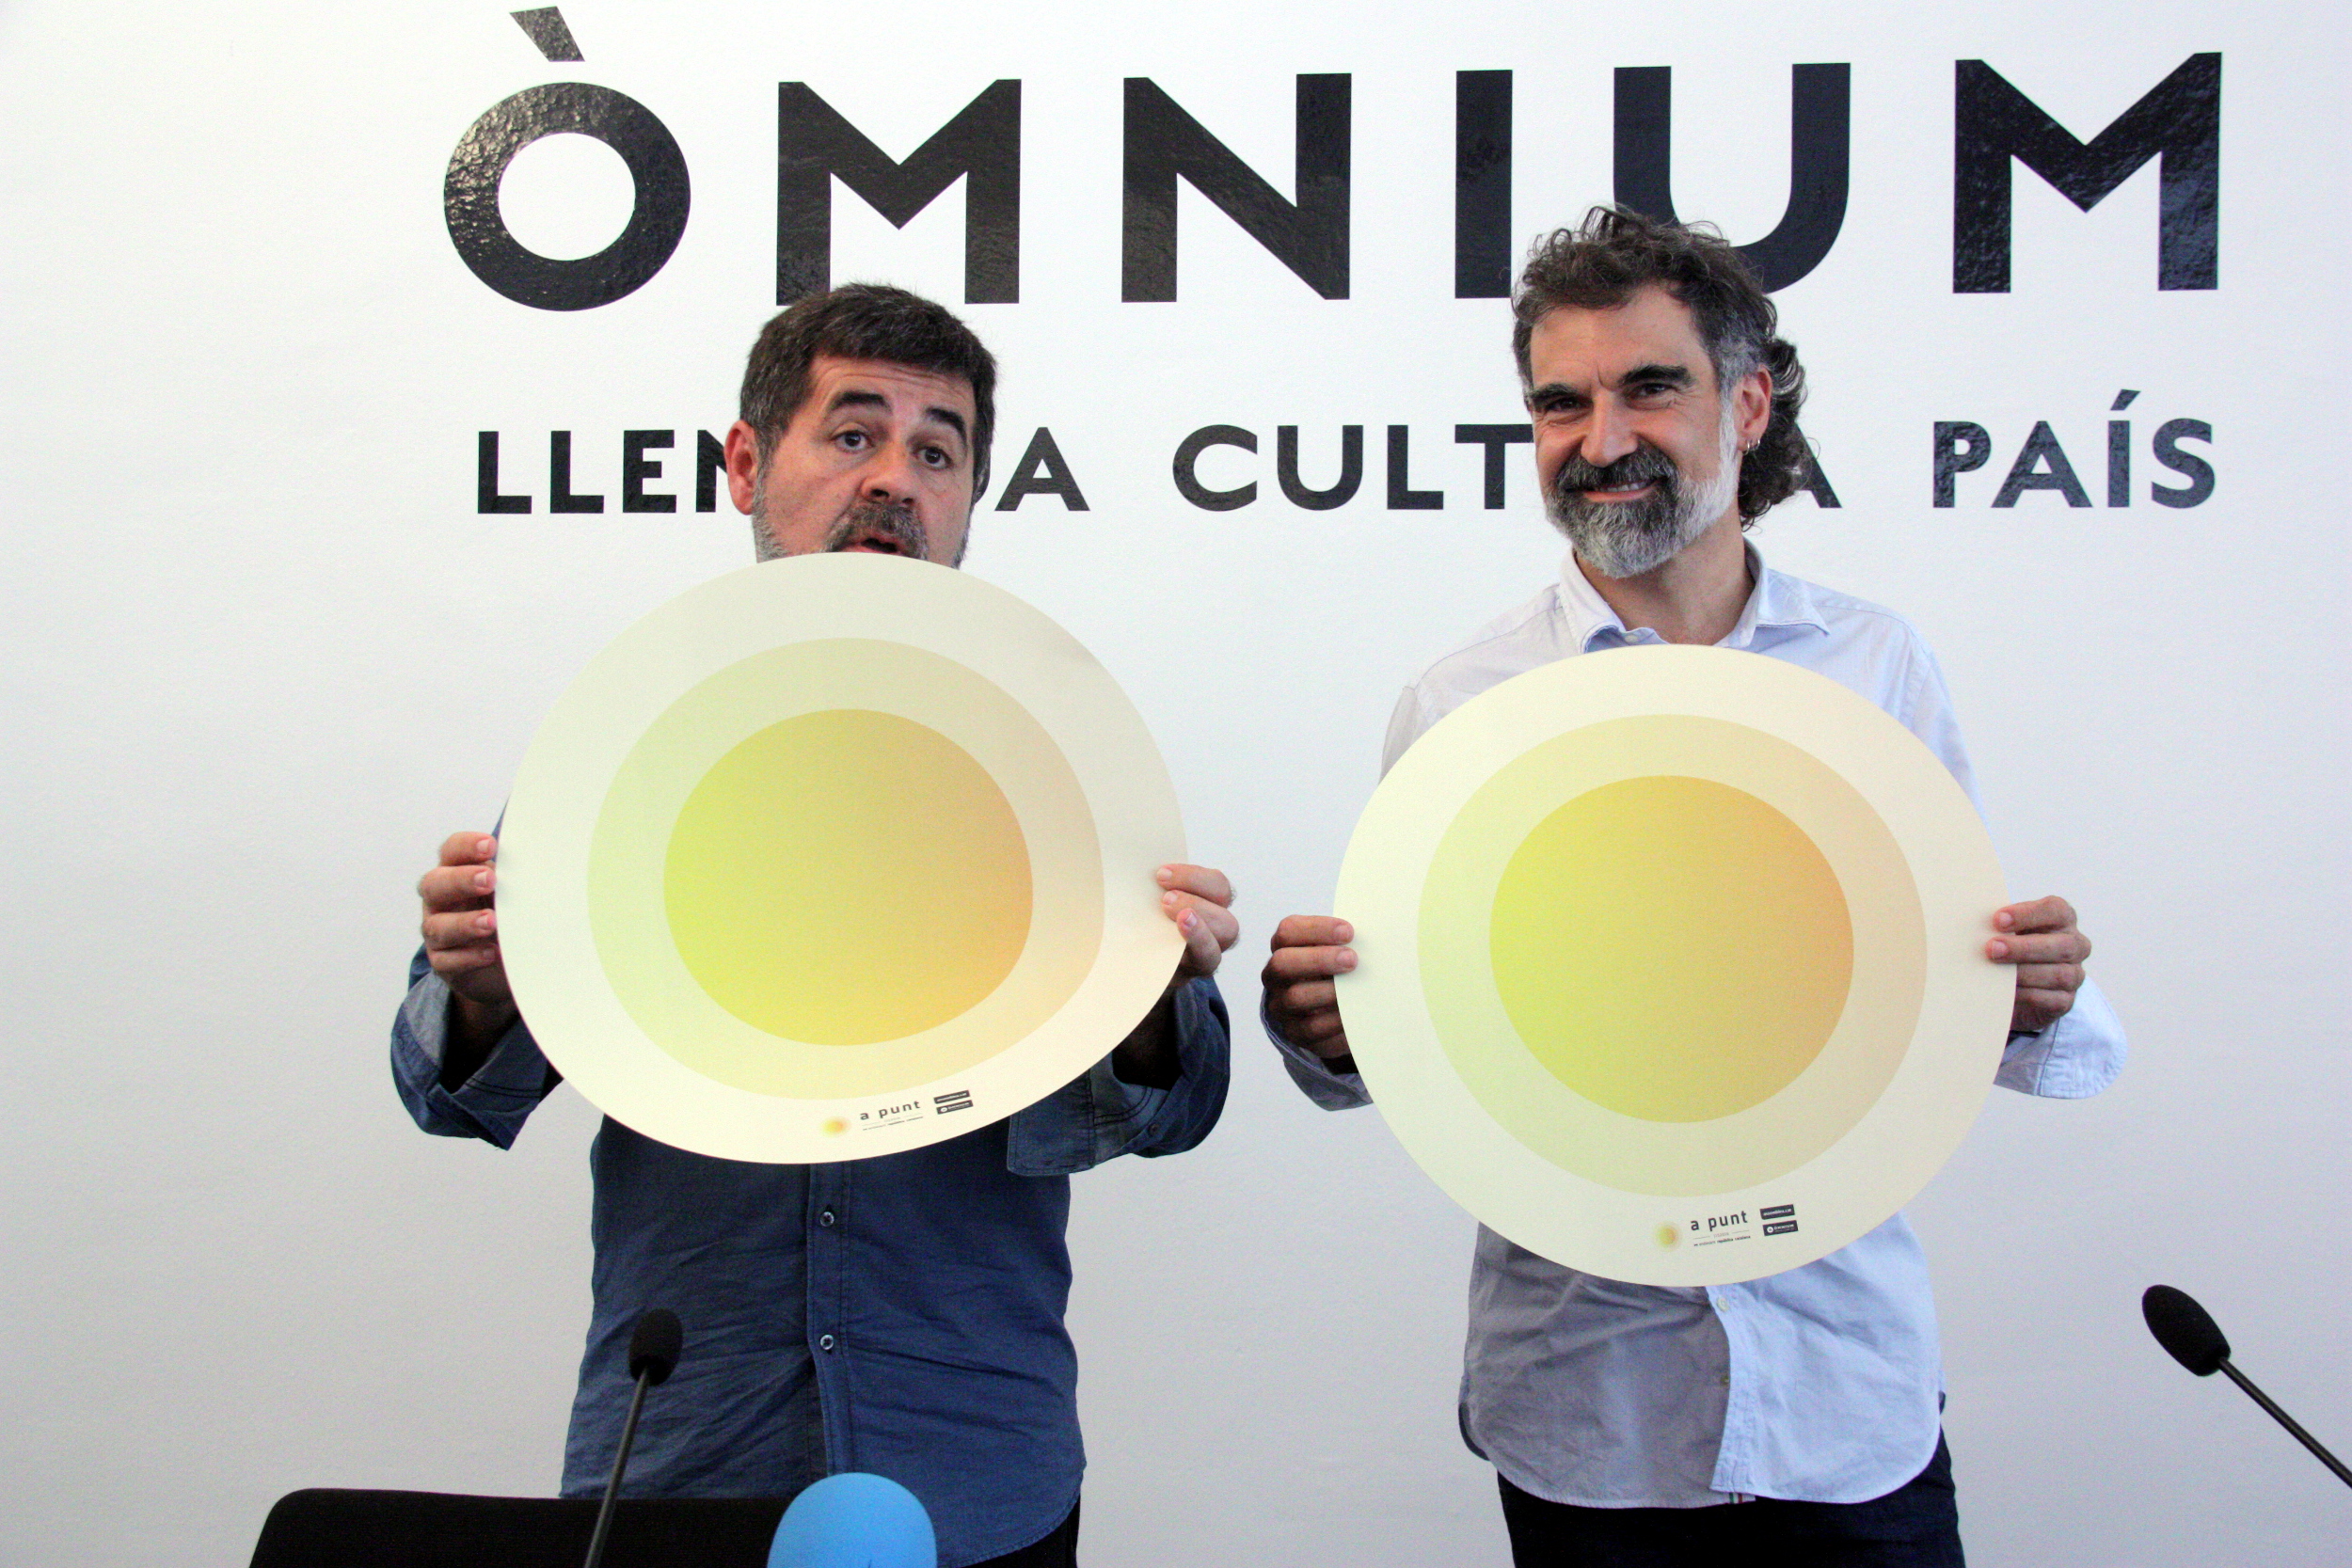 The President of the Catalan National Assembly, Jordi Sànchez, and that of Òmnium Cultural, Jordi Cuixart, representing the two main organisations behind the last massive pro-independence mobilisations on Catalonia's National Day (by ACN)